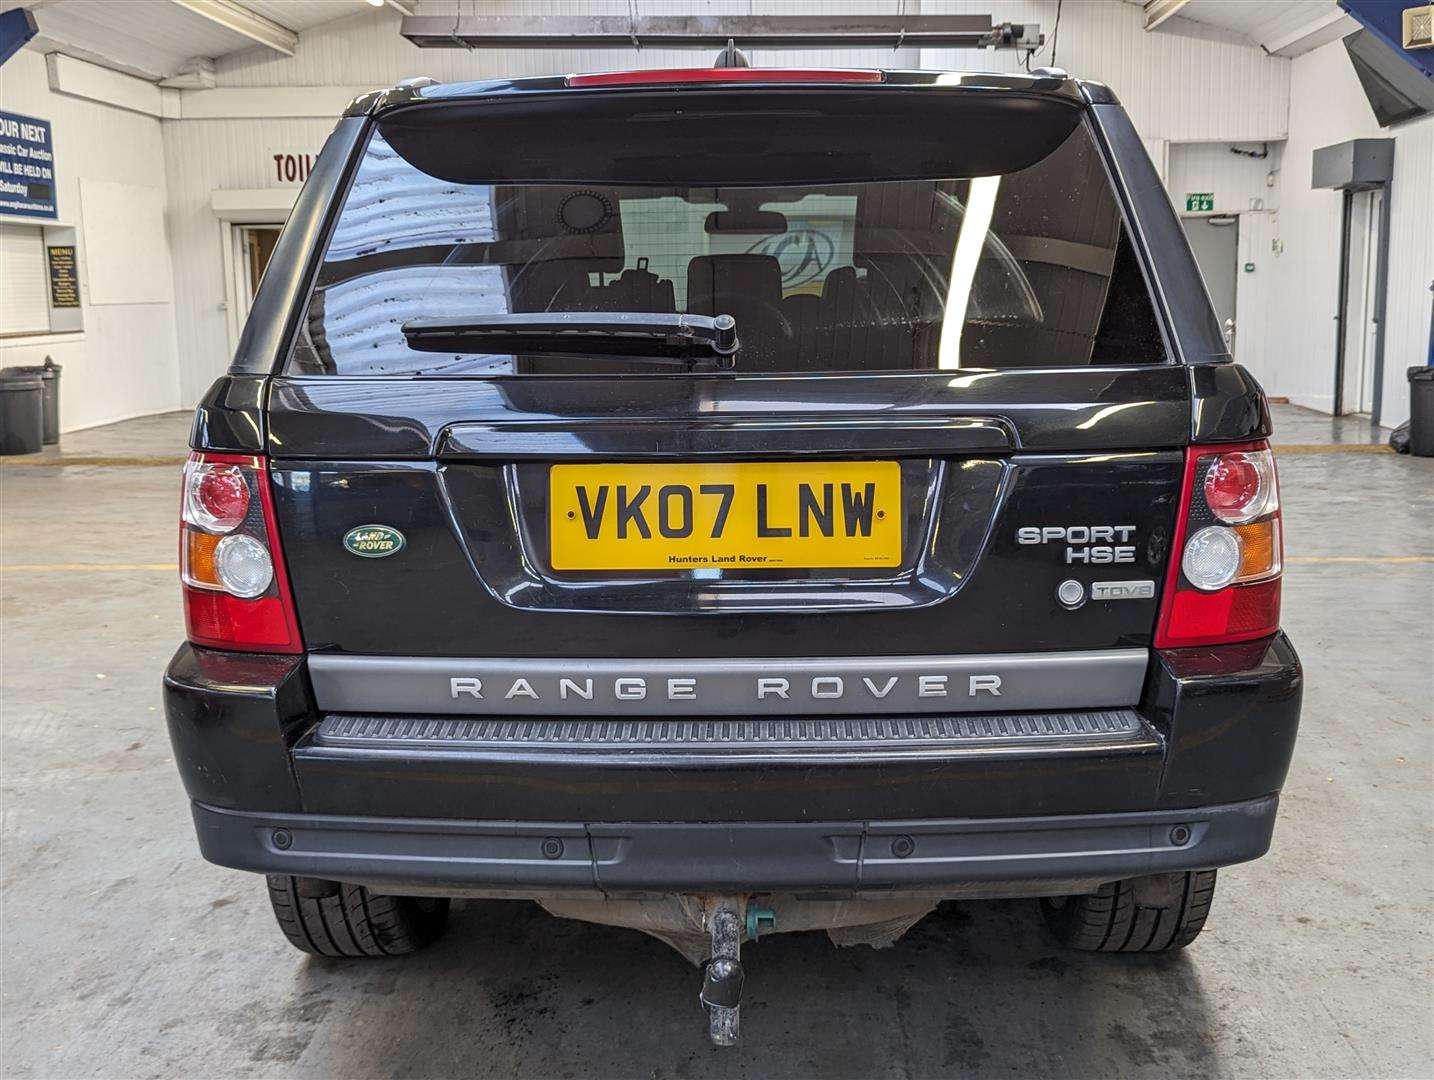 2007 LAND ROVER RANGE ROVER SP HSE TDV8 AUTO - Image 5 of 30